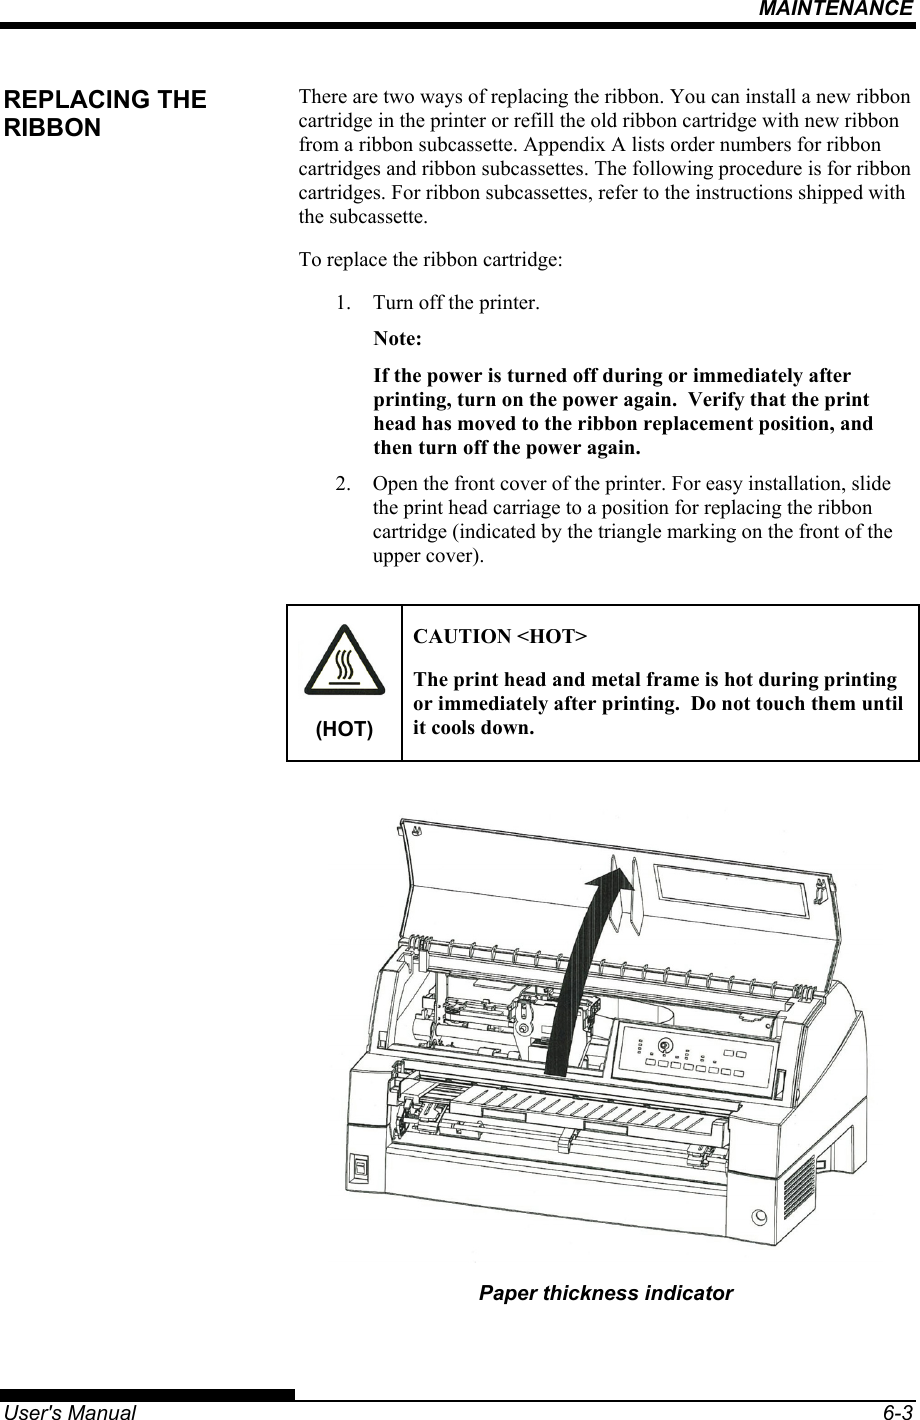 MAINTENANCE   User&apos;s Manual  6-3 There are two ways of replacing the ribbon. You can install a new ribbon cartridge in the printer or refill the old ribbon cartridge with new ribbon from a ribbon subcassette. Appendix A lists order numbers for ribbon cartridges and ribbon subcassettes. The following procedure is for ribbon cartridges. For ribbon subcassettes, refer to the instructions shipped with the subcassette. To replace the ribbon cartridge: 1.  Turn off the printer. Note: If the power is turned off during or immediately after printing, turn on the power again.  Verify that the print head has moved to the ribbon replacement position, and then turn off the power again. 2.  Open the front cover of the printer. For easy installation, slide the print head carriage to a position for replacing the ribbon cartridge (indicated by the triangle marking on the front of the upper cover).  (HOT) CAUTION &lt;HOT&gt; The print head and metal frame is hot during printing or immediately after printing.  Do not touch them until it cools down.   Paper thickness indicator REPLACING THE RIBBON 